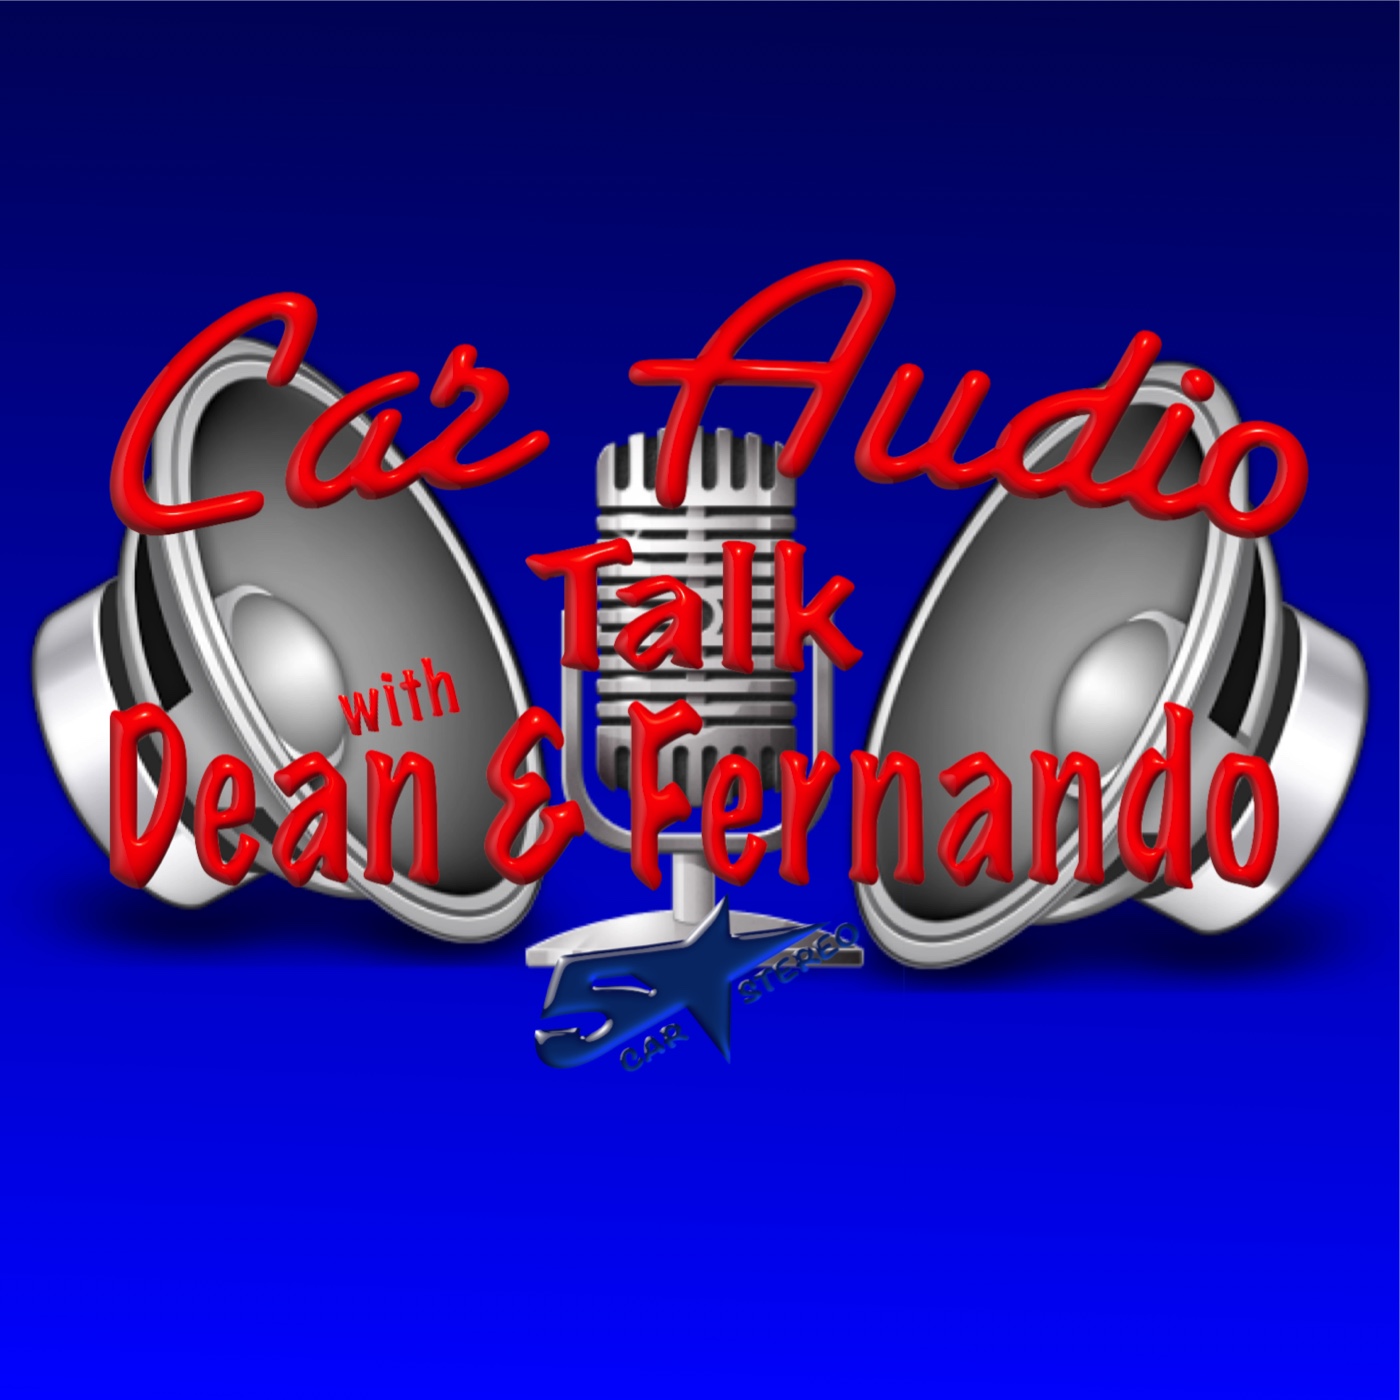 Getting you up to date why there has been no videos this week. Car Audio Talk the YouTube Live Show